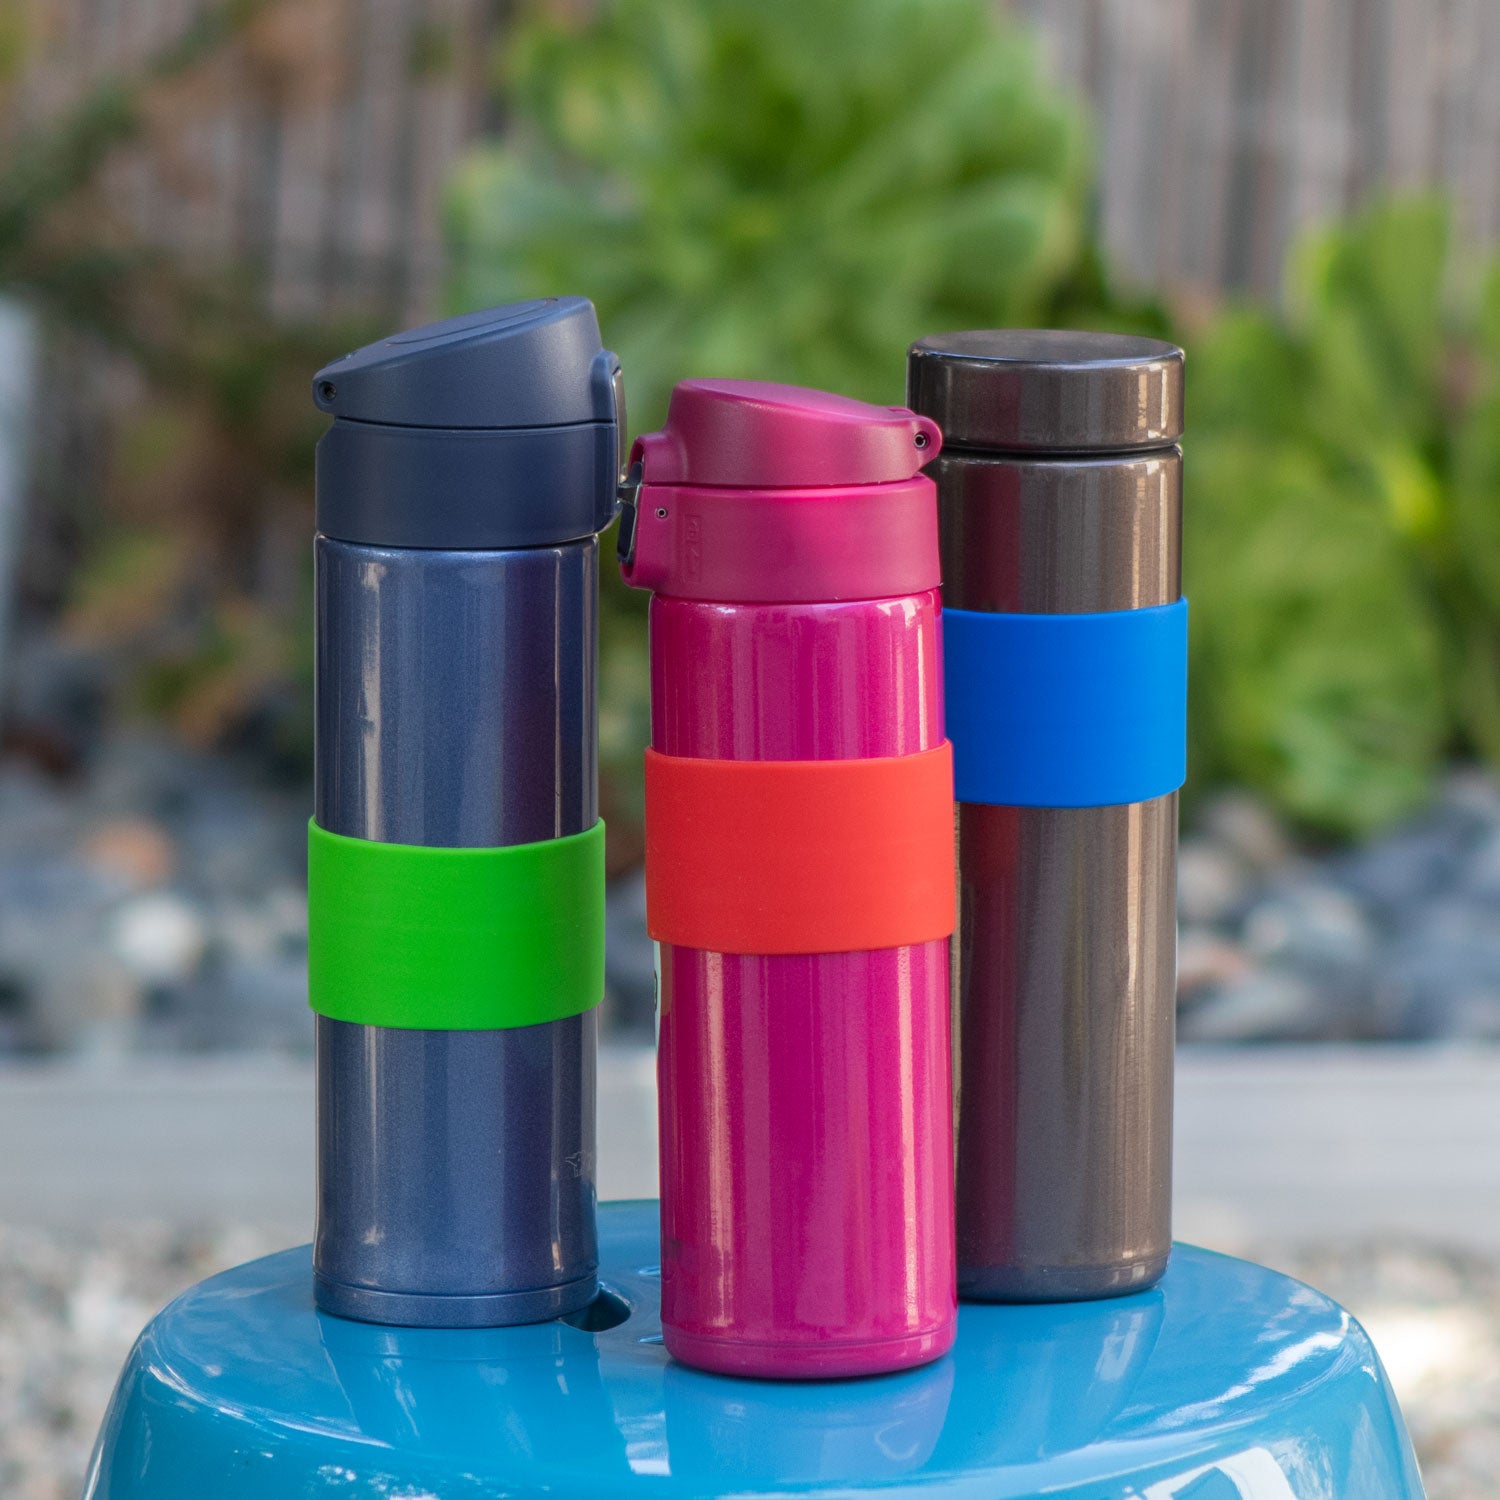 Silicone Grip Tumbler with Straw